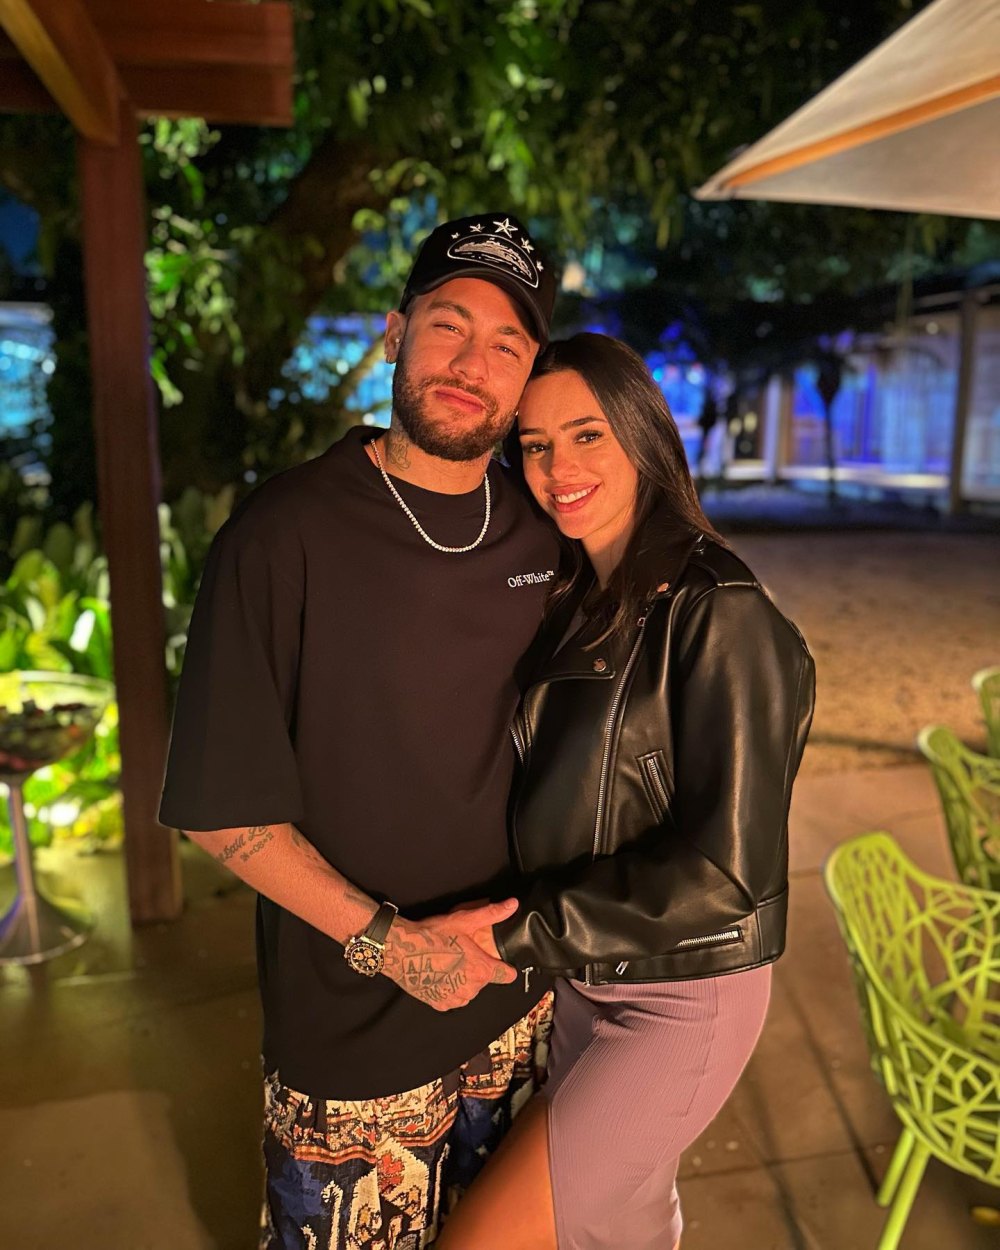 Soccer Star Neymar Publicly Apologizes to Pregnant Girlfriend Amid Infidelity Speculation